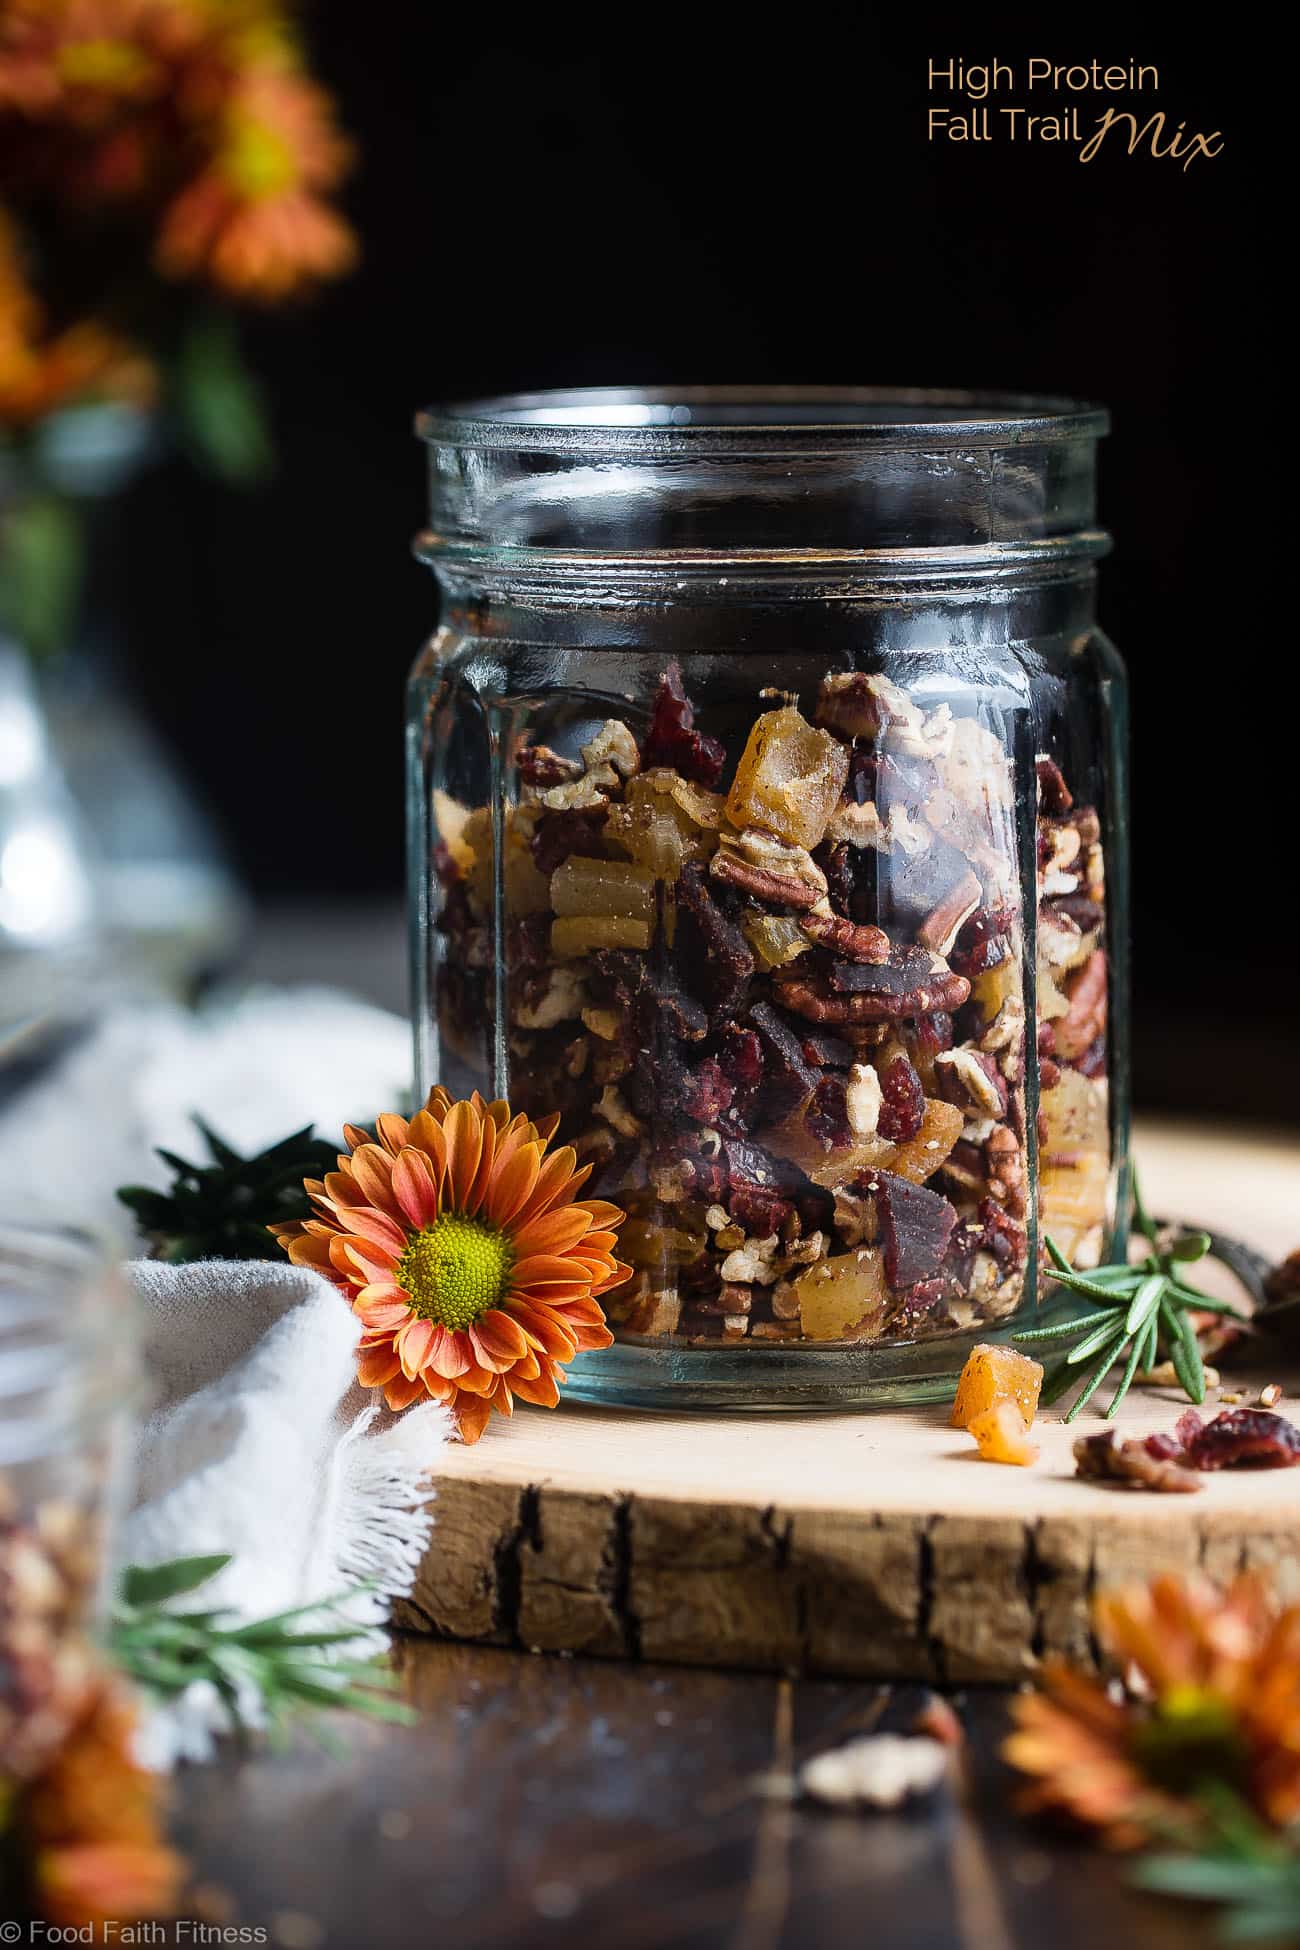 Protein Packed Fall Trail Mix - This quick and easy fall trail mix recipe only uses 6 ingredients and is secretly high in protein! It's a healthy gluten, grain and dairy free portable snack for busy days that is adult and kid friendly! | Foodfaithfitness.com | @FoodFaithFit 